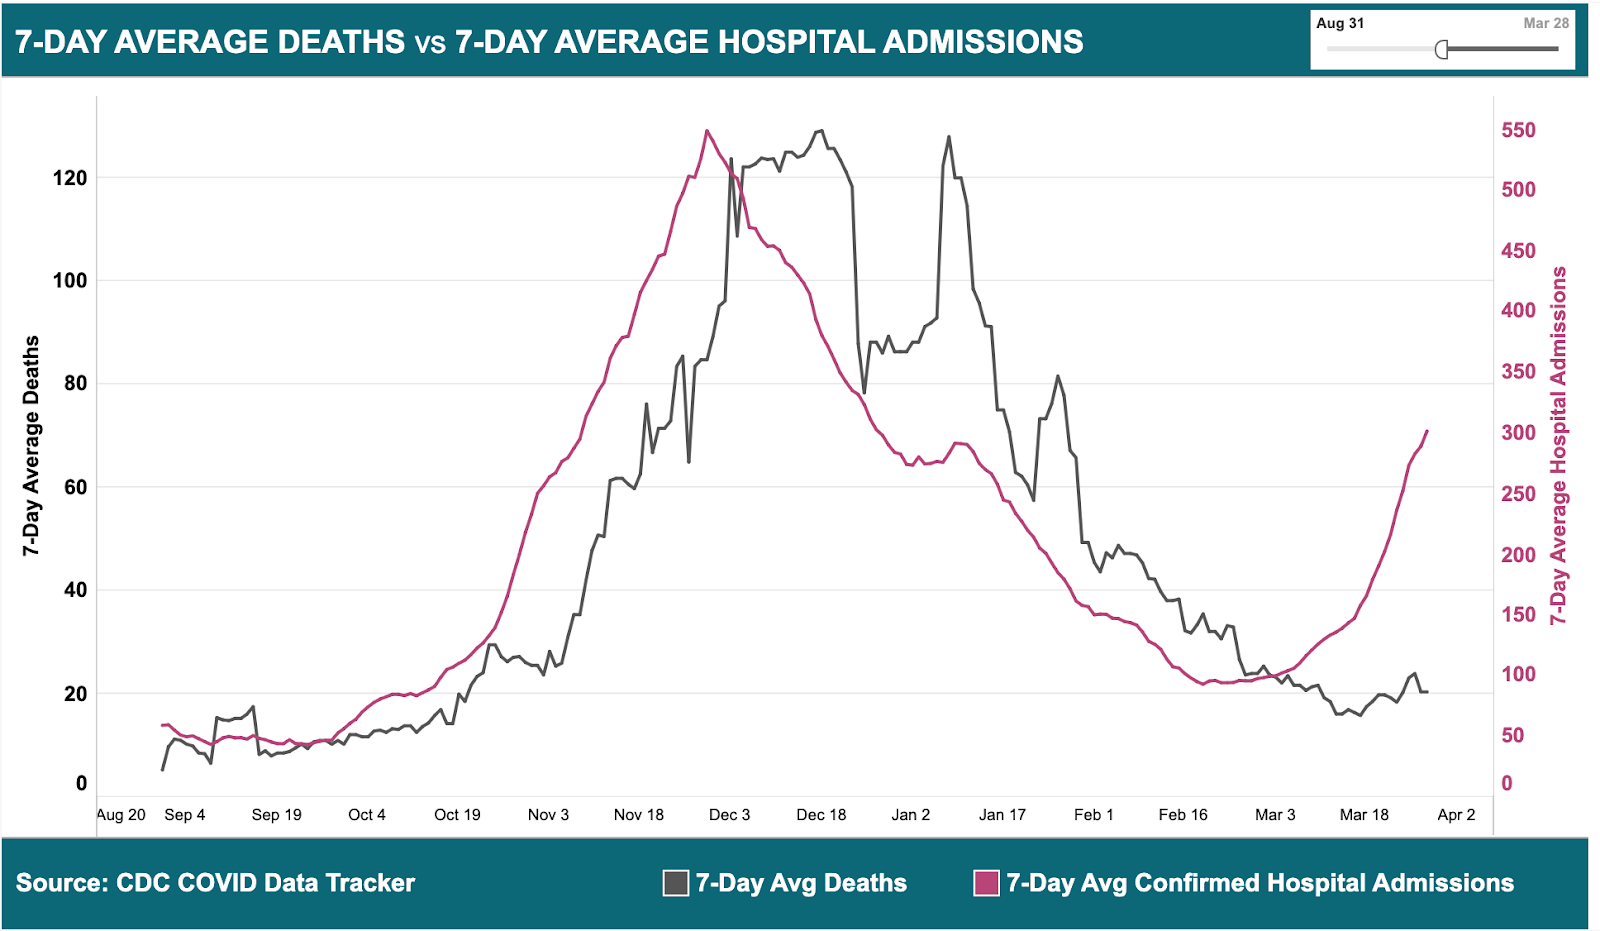 A line graph showing Michigan's 7-day average deaths versus hospital admissions